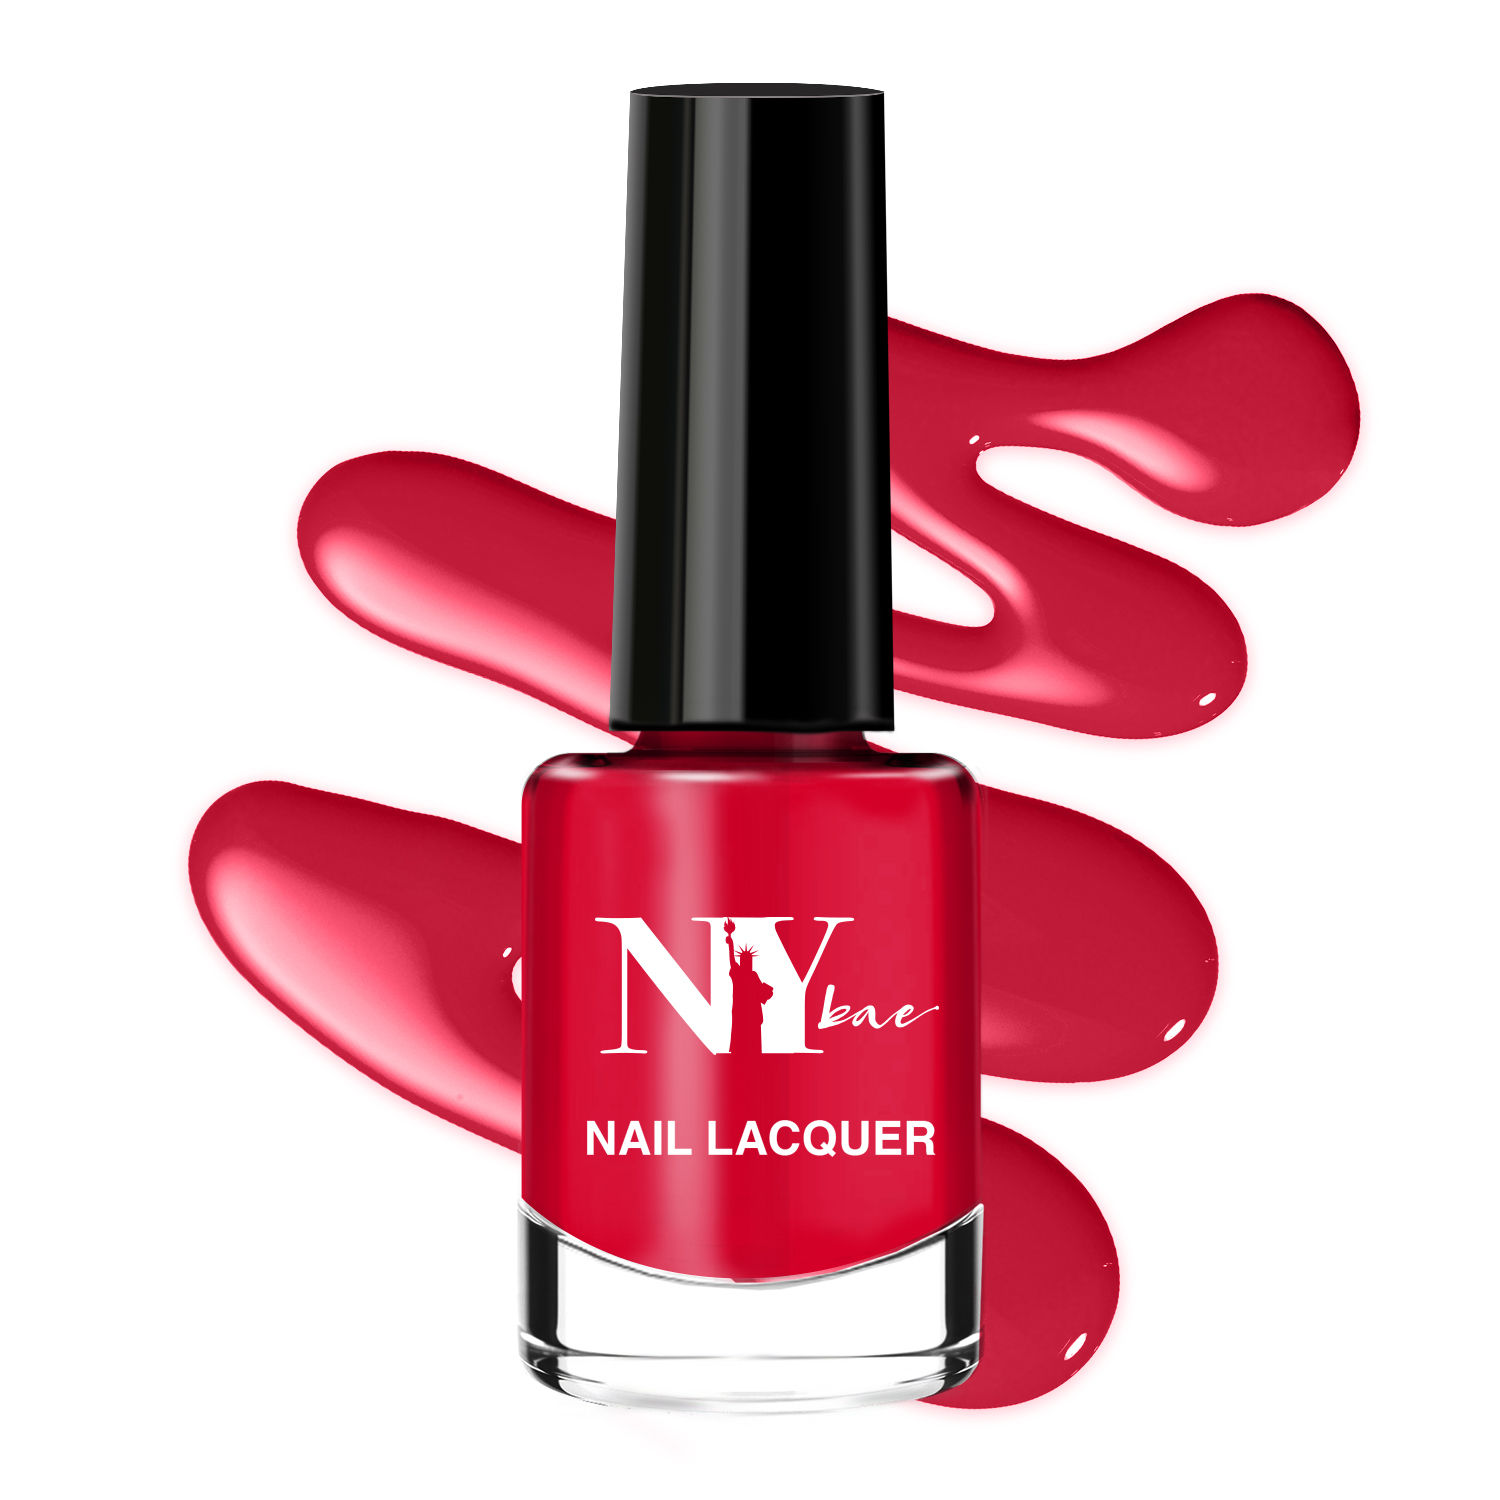 NY bae Quartet Nail Paint Combo (Set of 4 with Pouch) - Nude Creme, Pink  Glitter, Red Matte, Red Sugar Effect (6 ml each) Price in India - Buy NY bae  Quartet